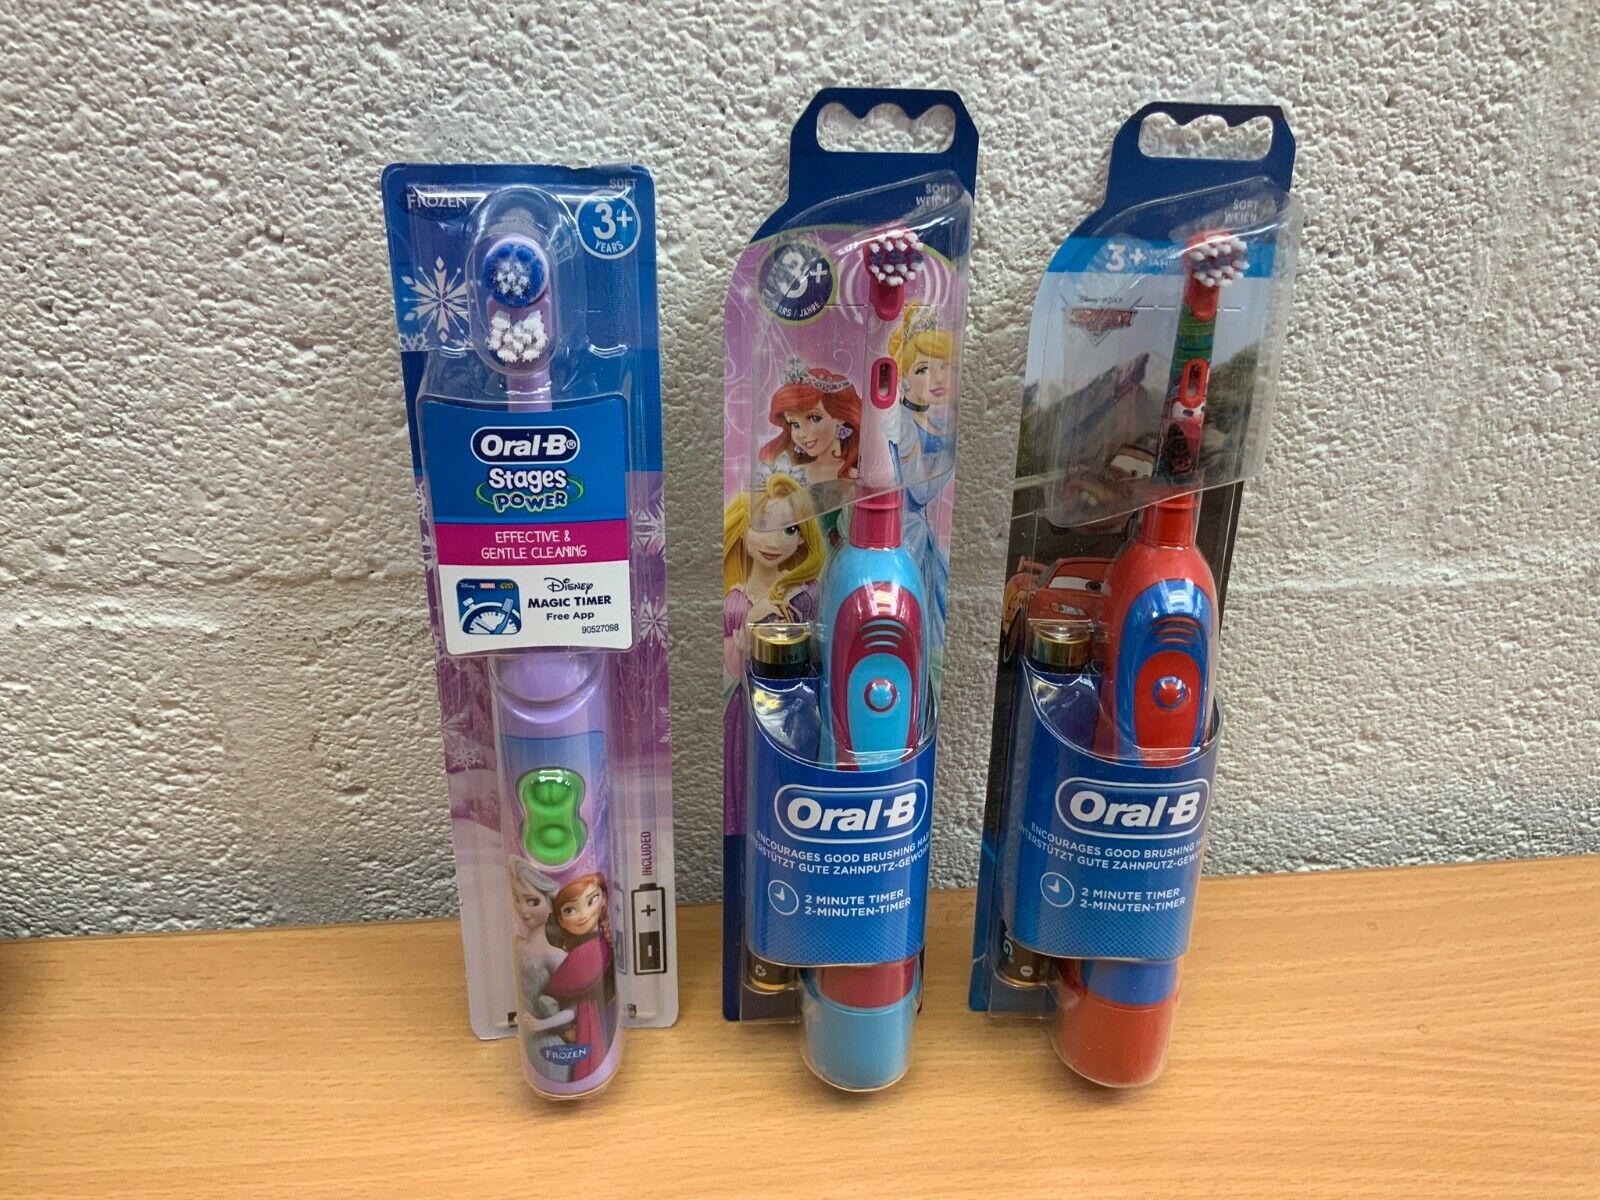 ORAL-B STAGES Sales of SALE items from new works KID'S Max 85% OFF POWER ELECTRIC TOOTHBRUSH NEW DISNEY FROZEN